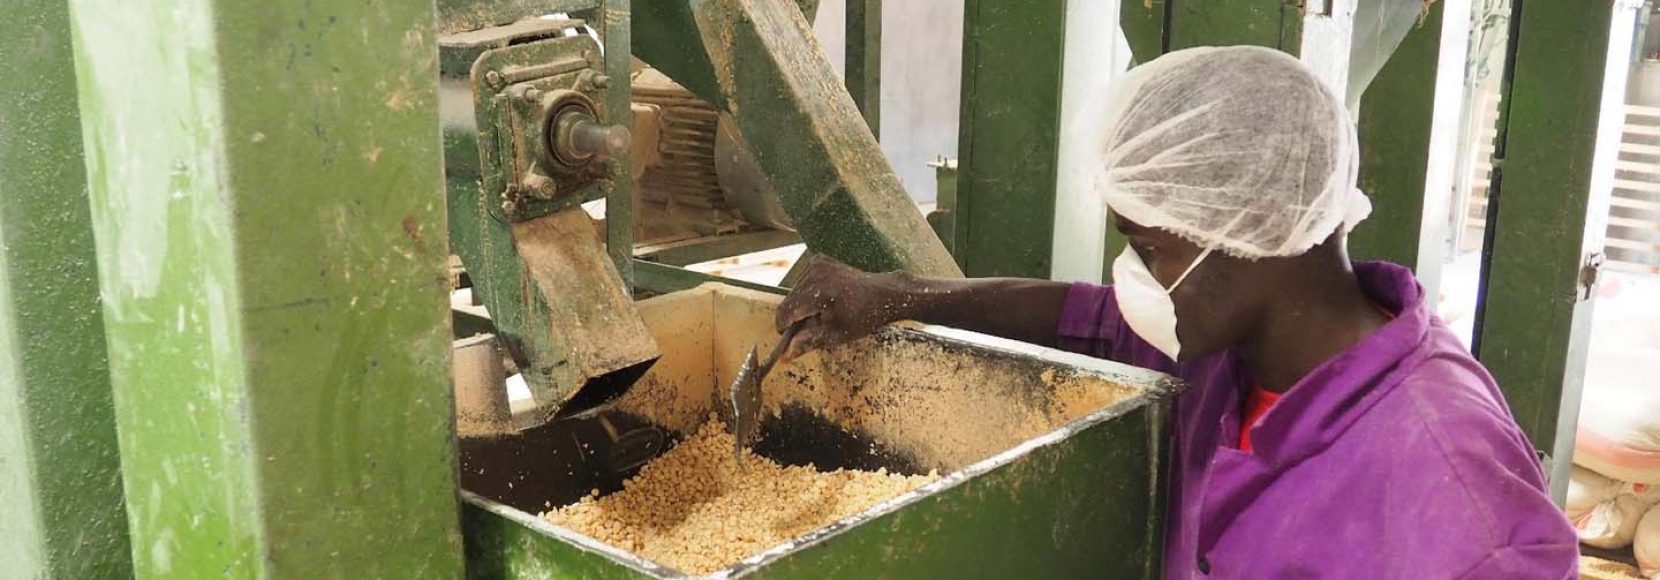 Photo of a food processor helping fight food insecurity in the developing world.